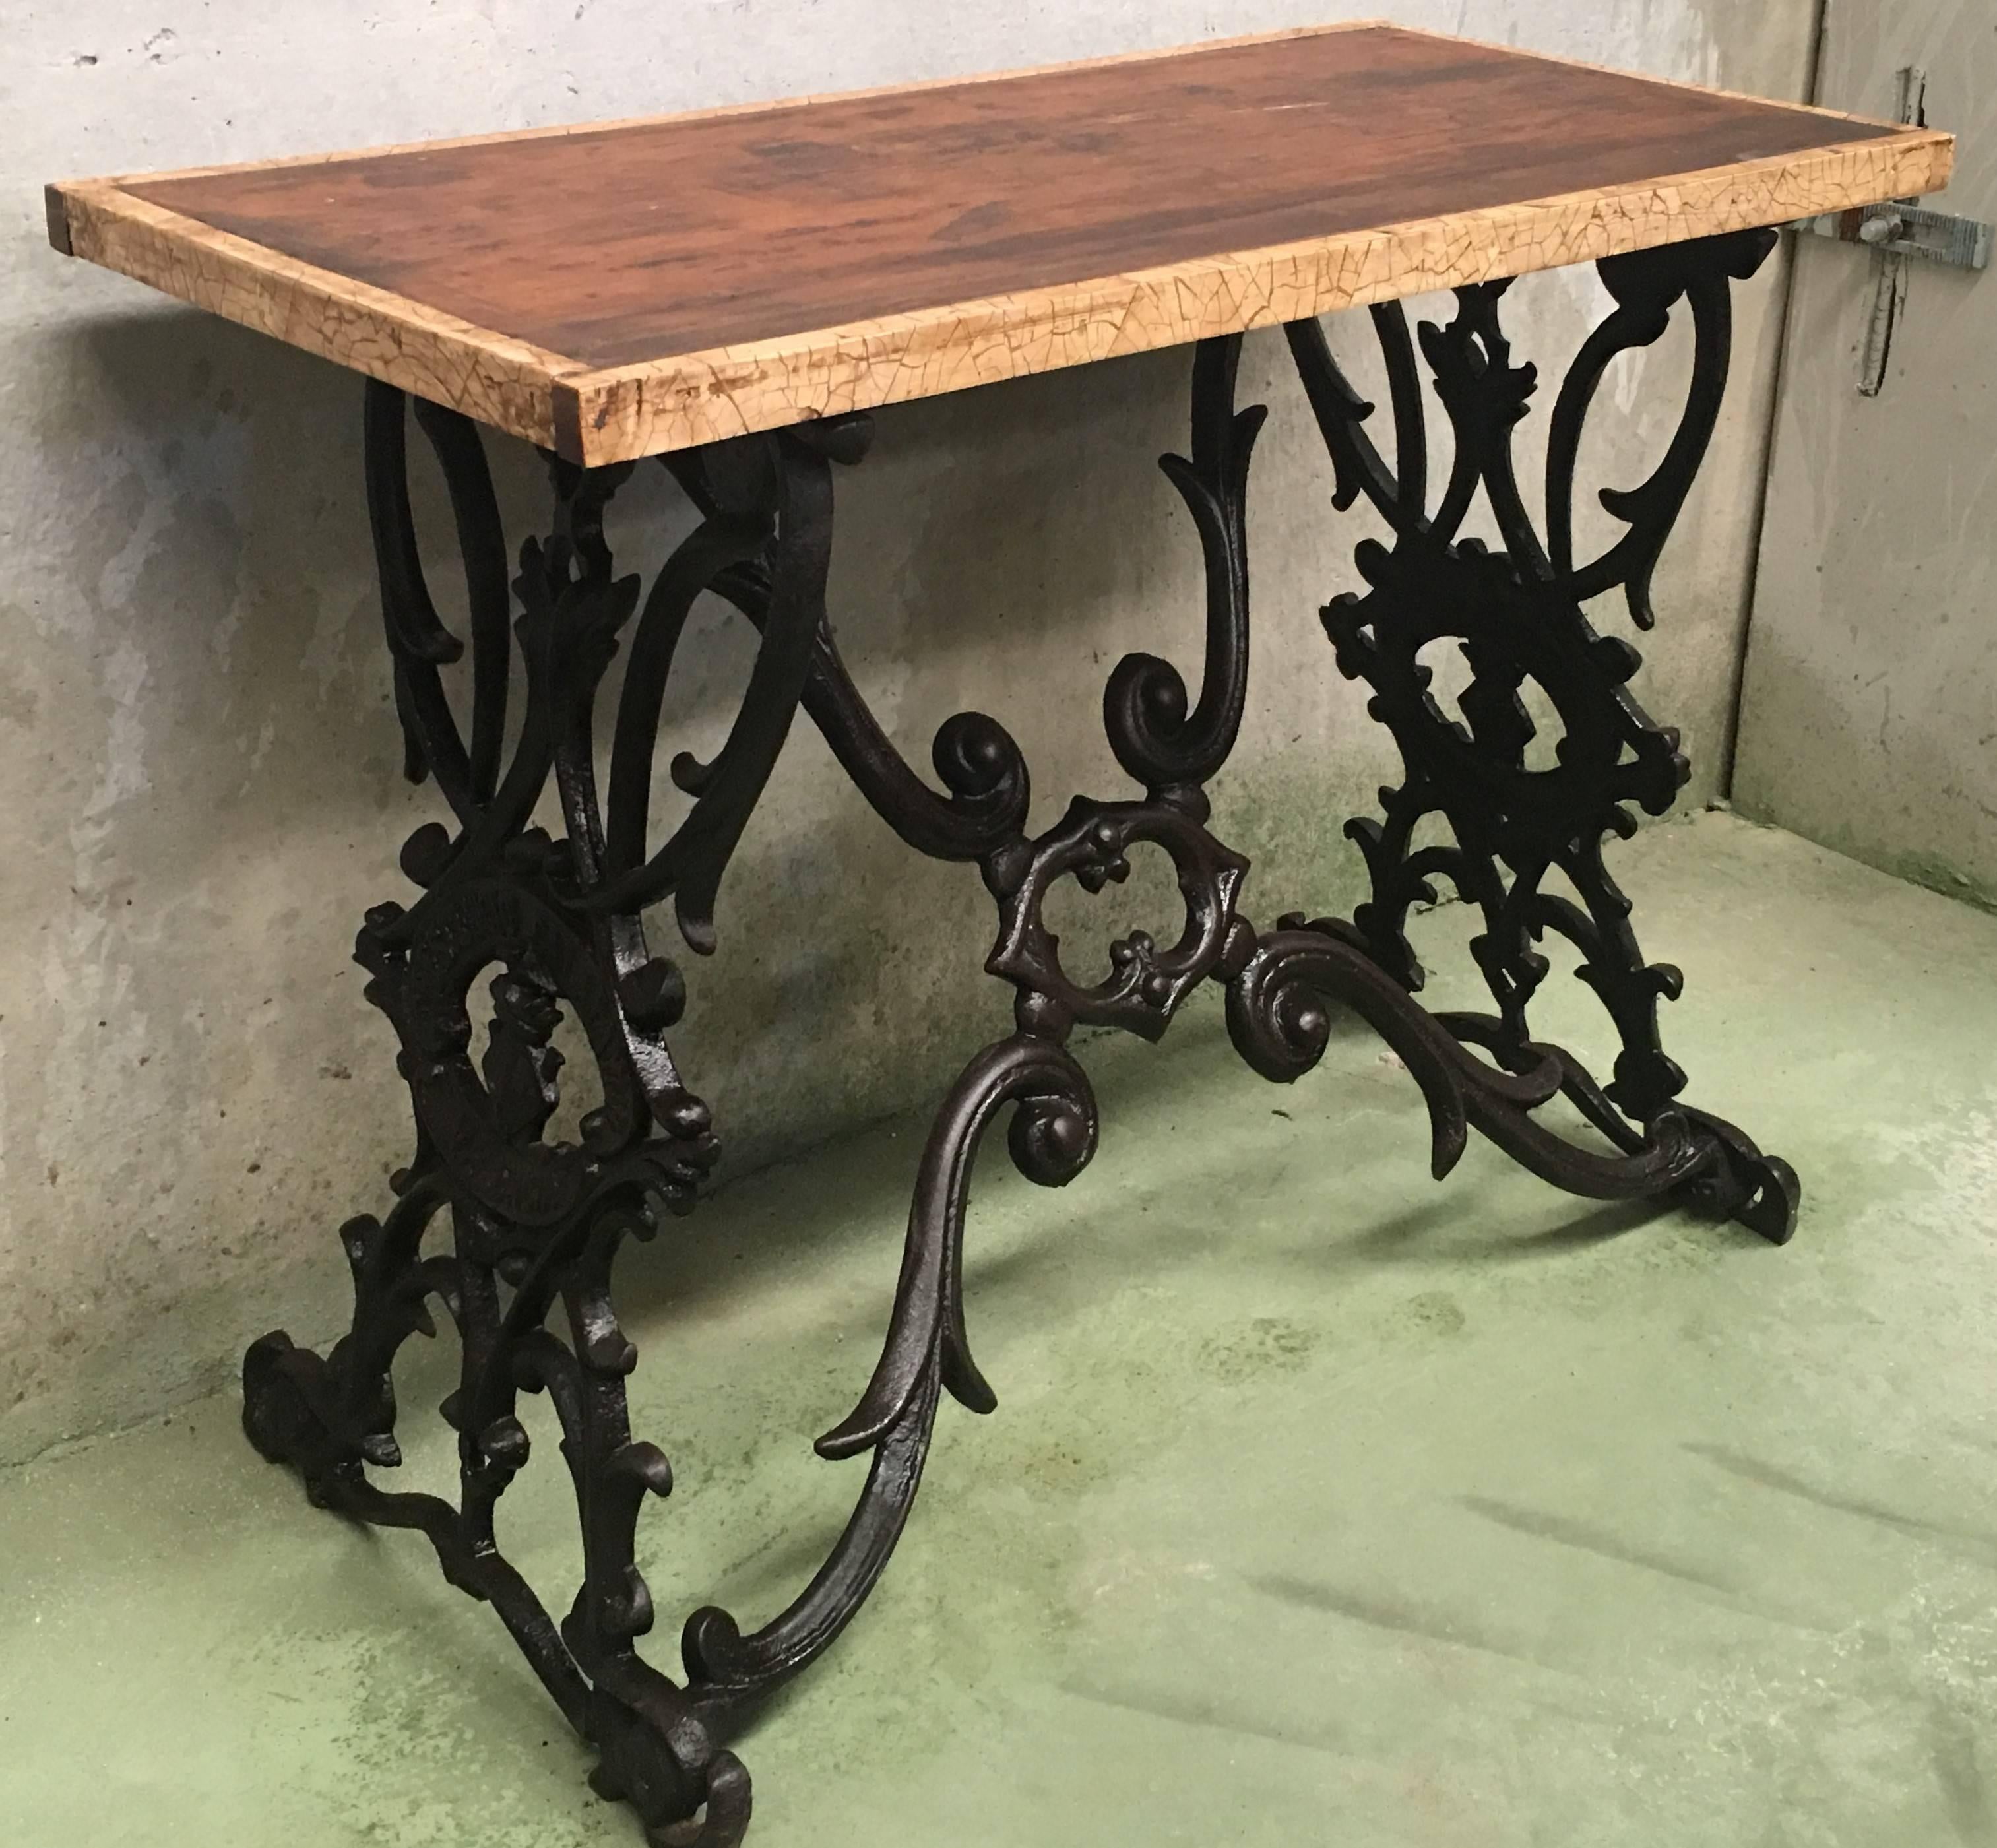 Beautiful antique 19th Spanish cast iron bistro or garden table with original wood top table.
Signed by Crescencio Calatayud, Valencia, Spain.